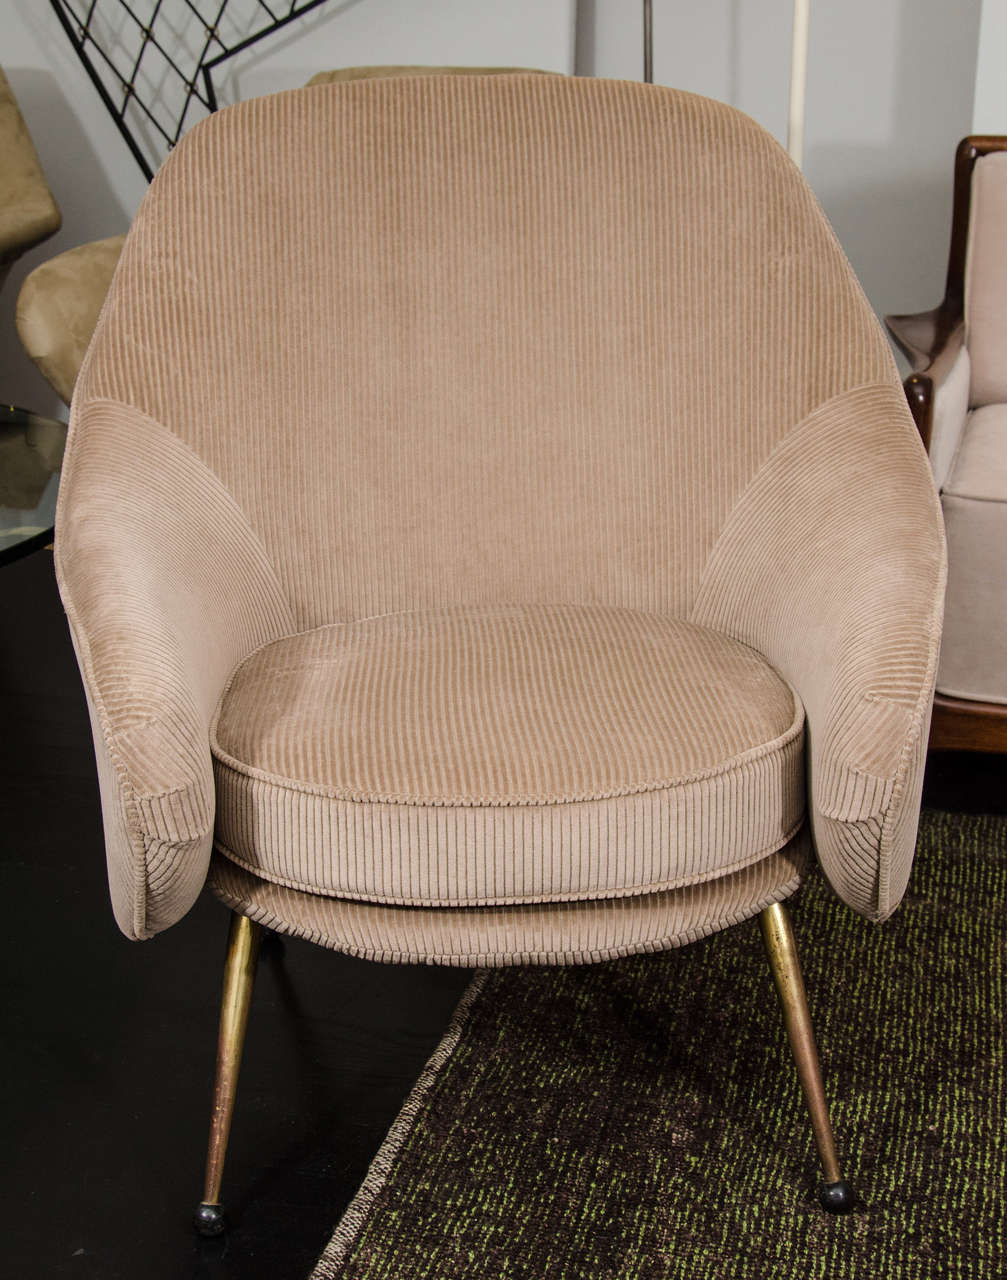 Classic and rare Martingala chairs by Marco Zanuso for Arflex, with period correct upholstery. Named for the pleat of fabric that adorns its back.